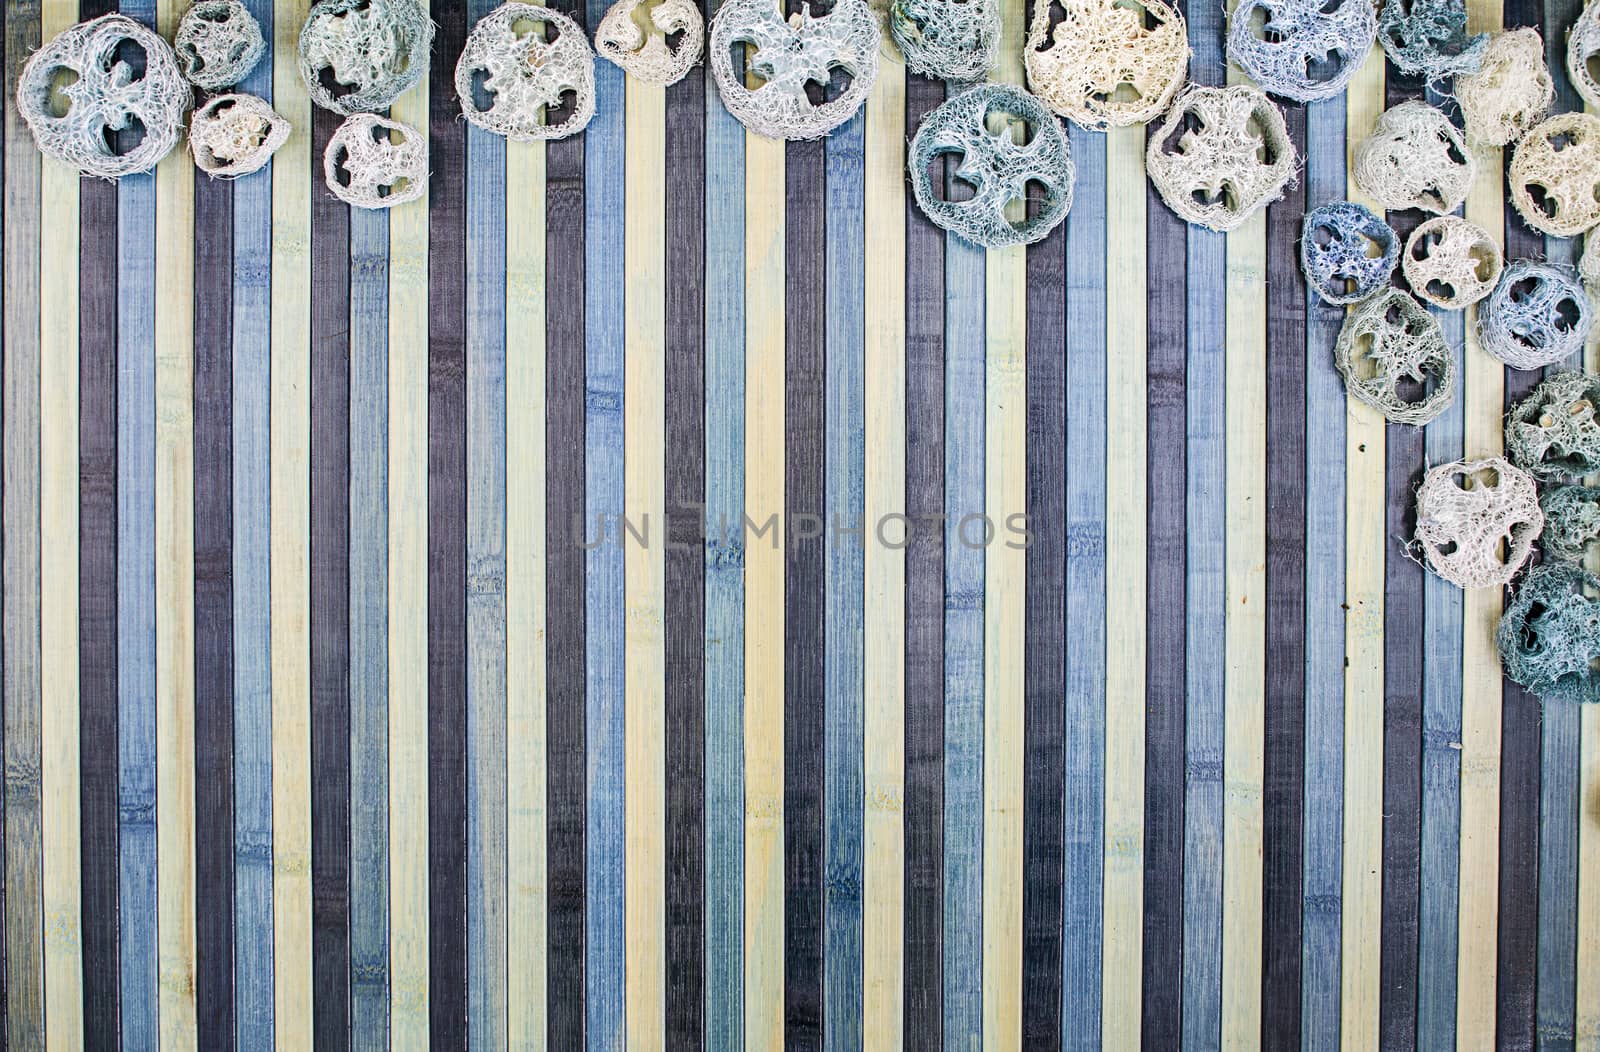 Background composition on wood in shades of light blue and blue  by robbyfontanesi